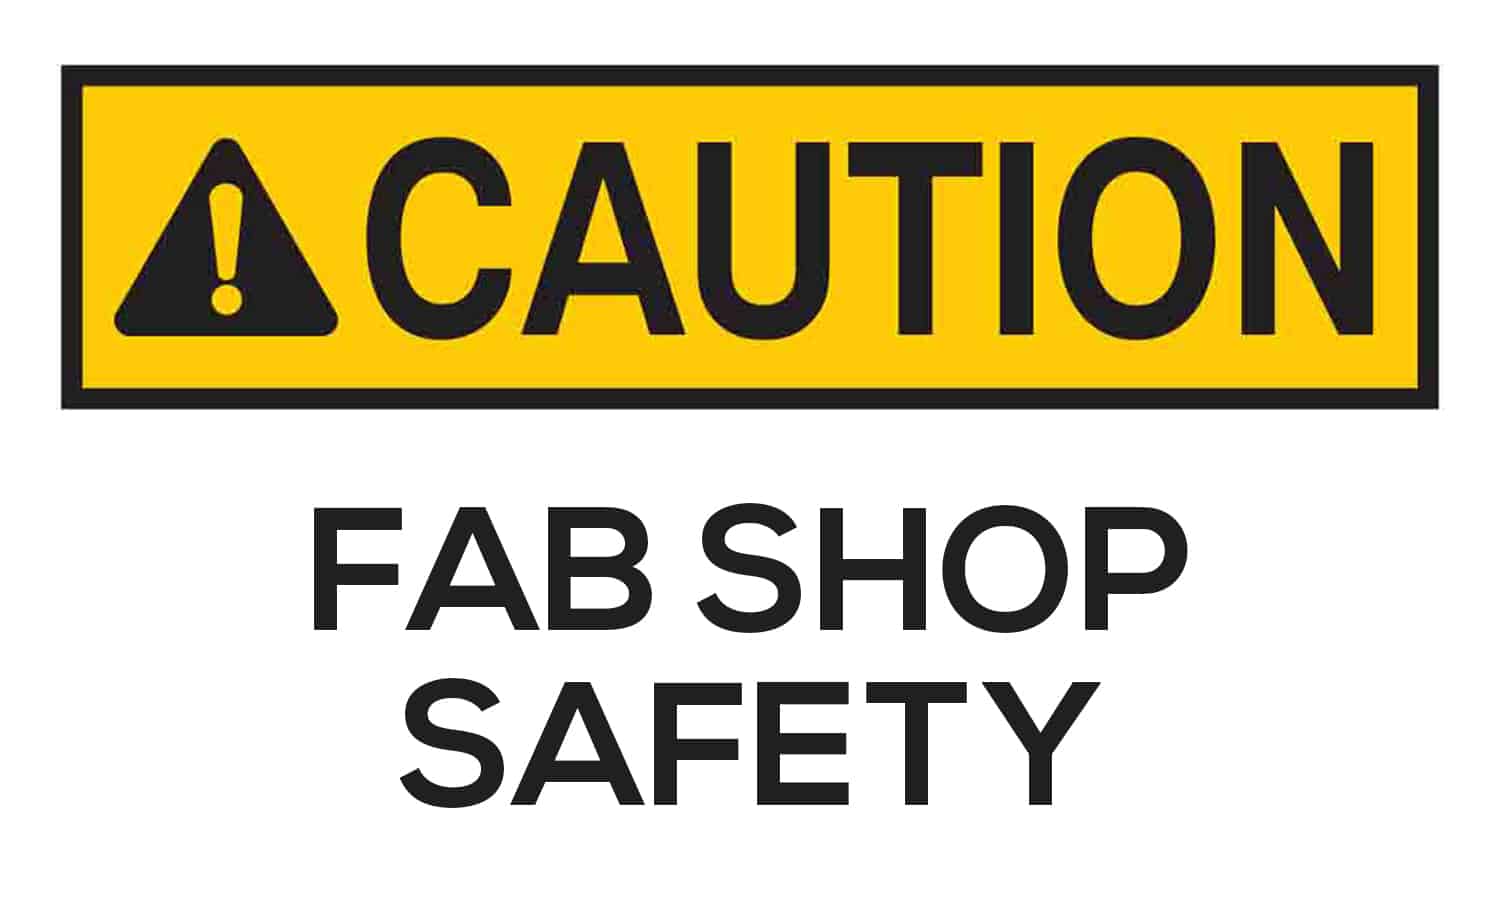 Fab Shop Safety: Personal Protective Equipment